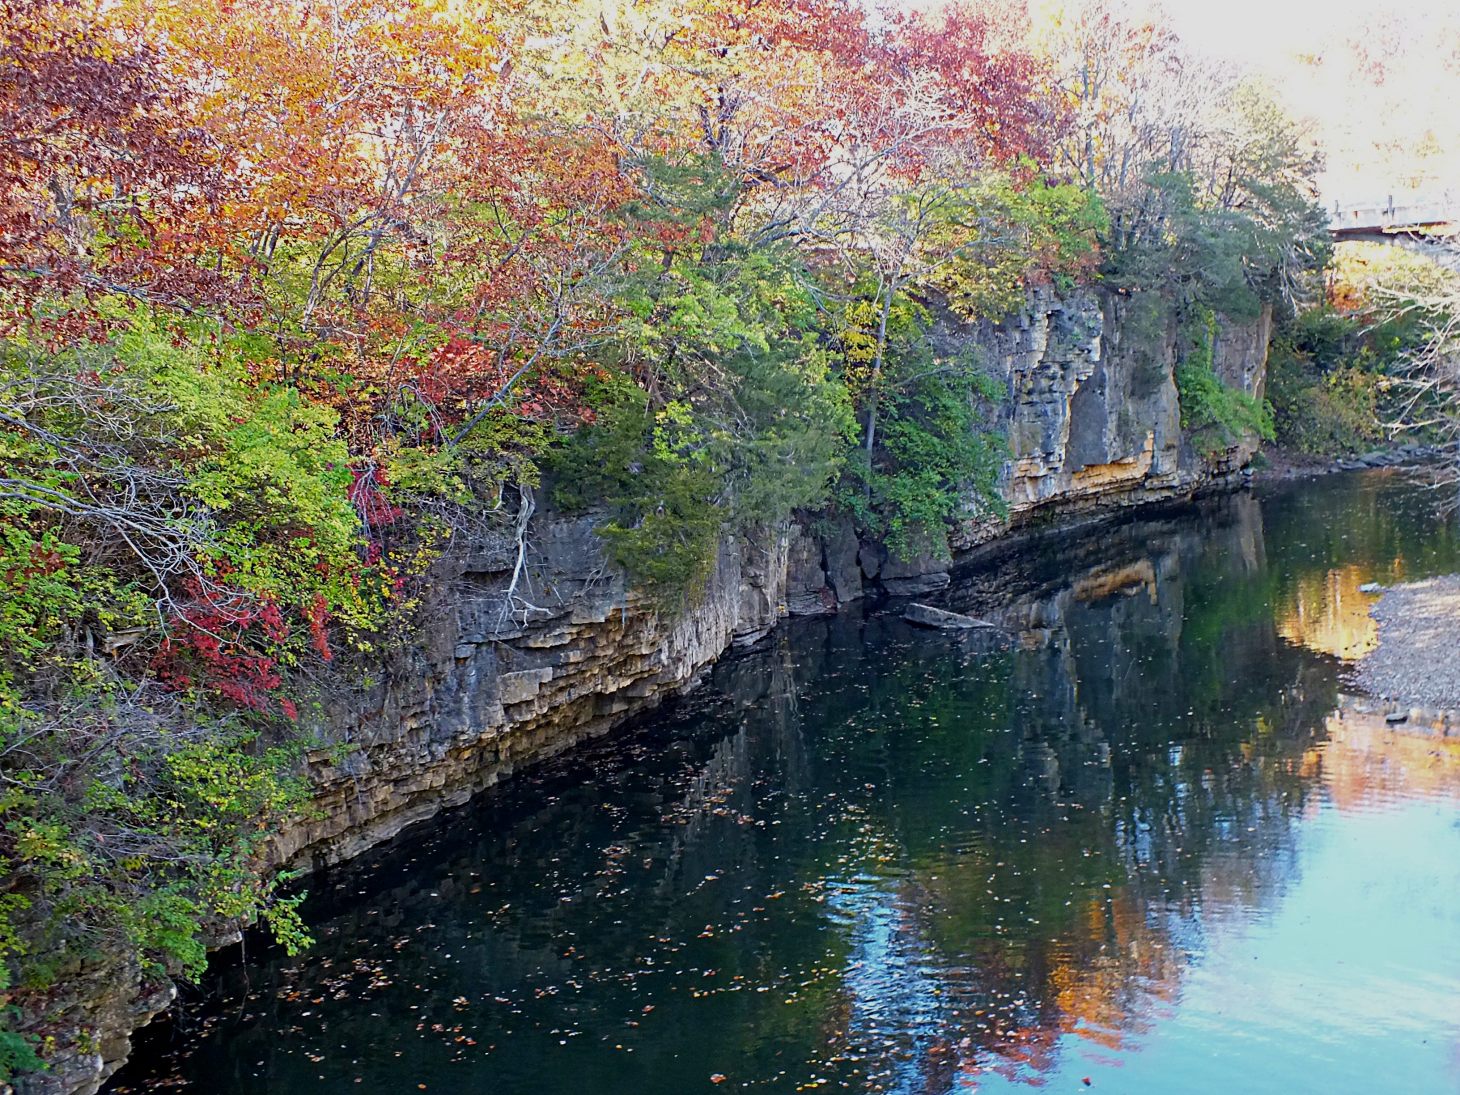 Fall by the Creek. Photo by Thomas Peace 2014